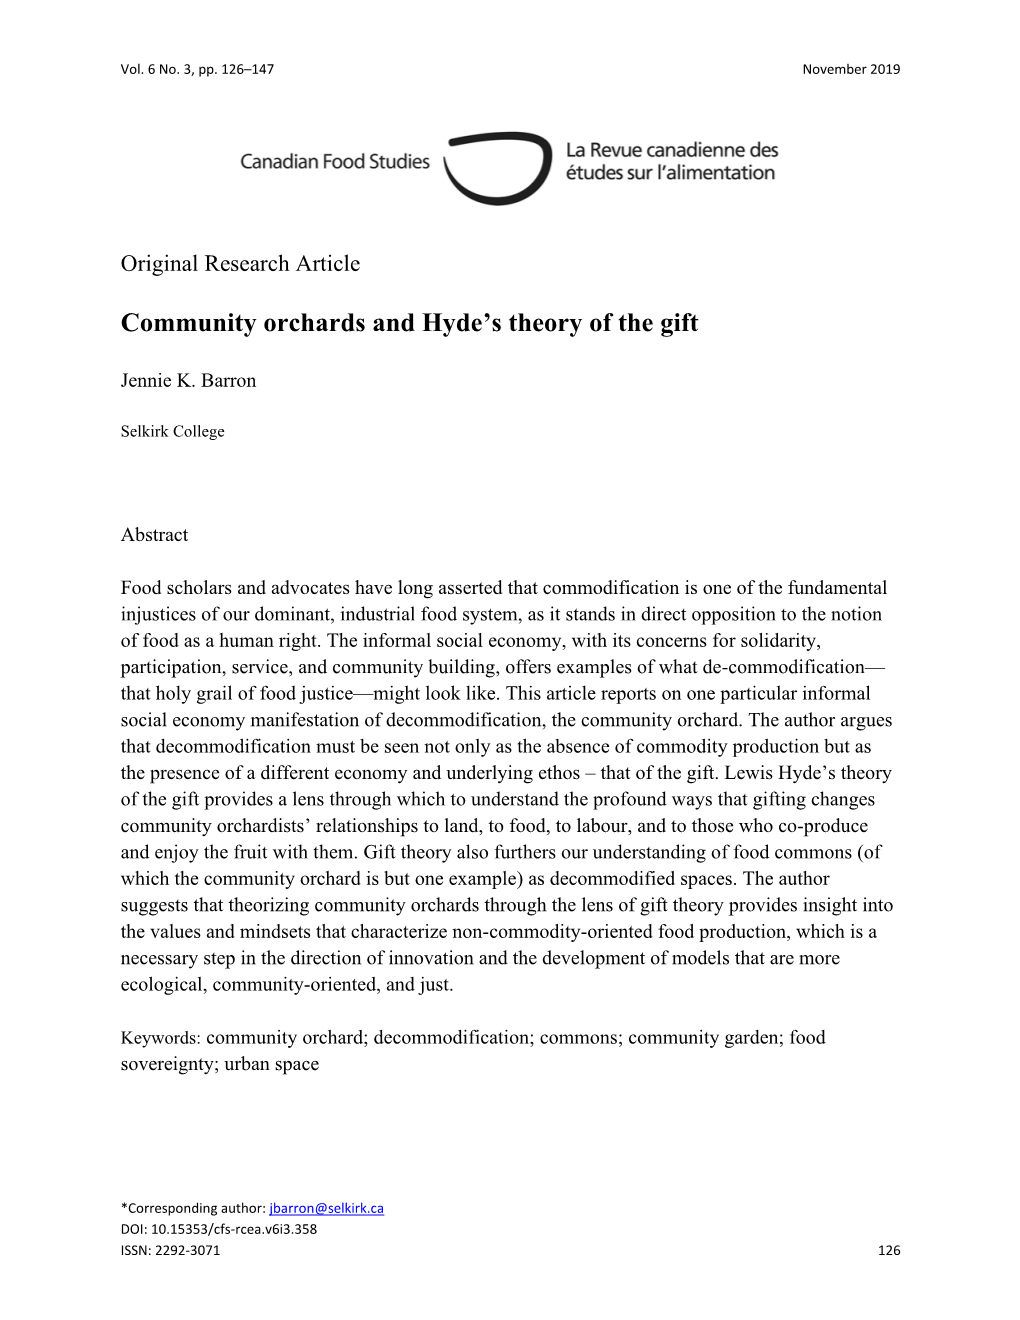 Community Orchards and Hyde's Theory of the Gift